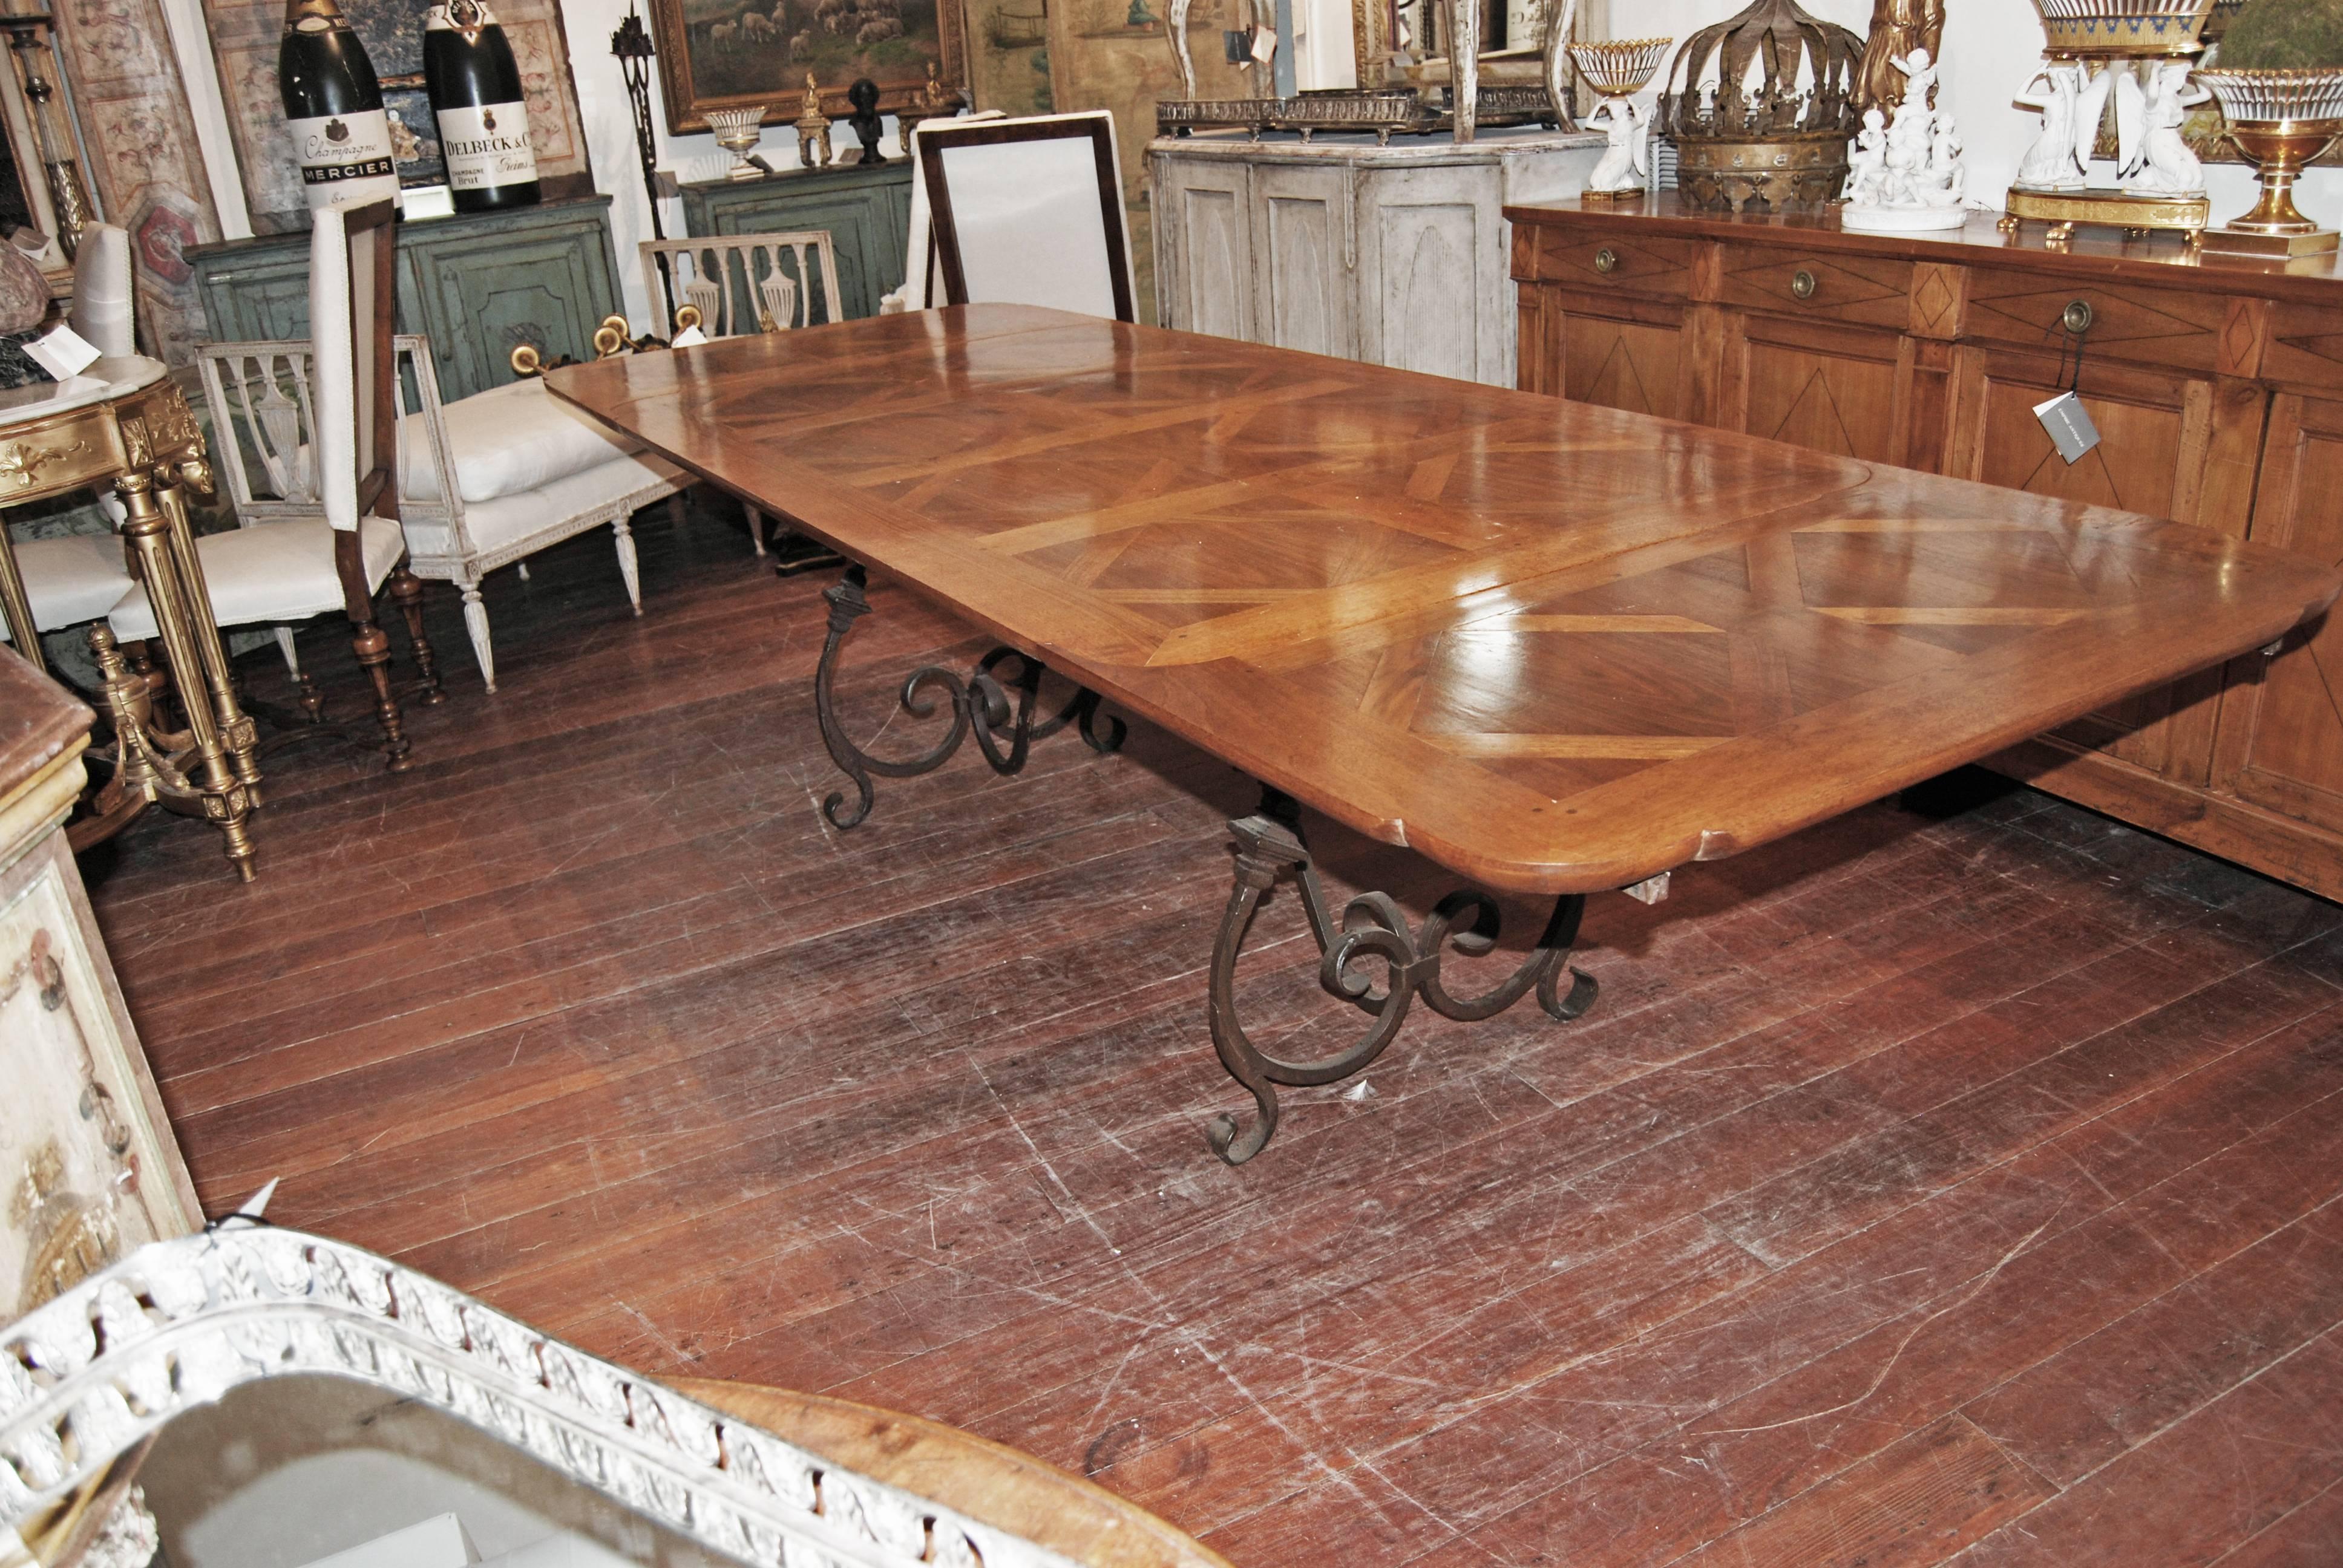 Parquet de Versailles flooring presented as a dining table with iron base. This table has two leaves and has three different sizes:
Measures: Two leafs 122